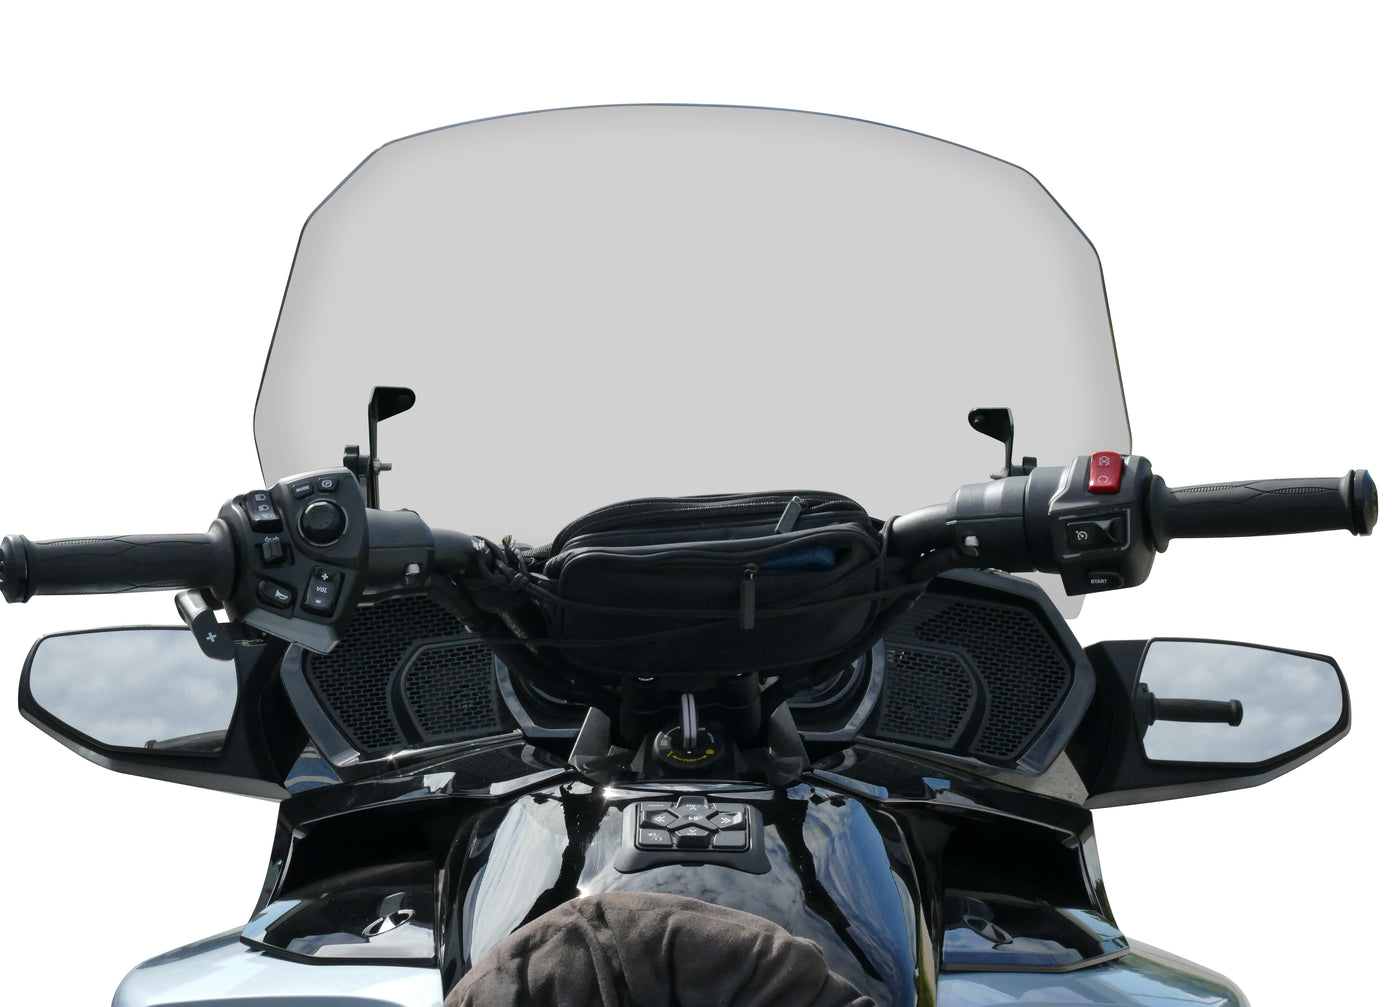 CERTIFIED PRE-OWNED - 20" Dark Grey Adjustable Windshield System for Can-Am Spyder F3-T/LTD (2016 & Up)